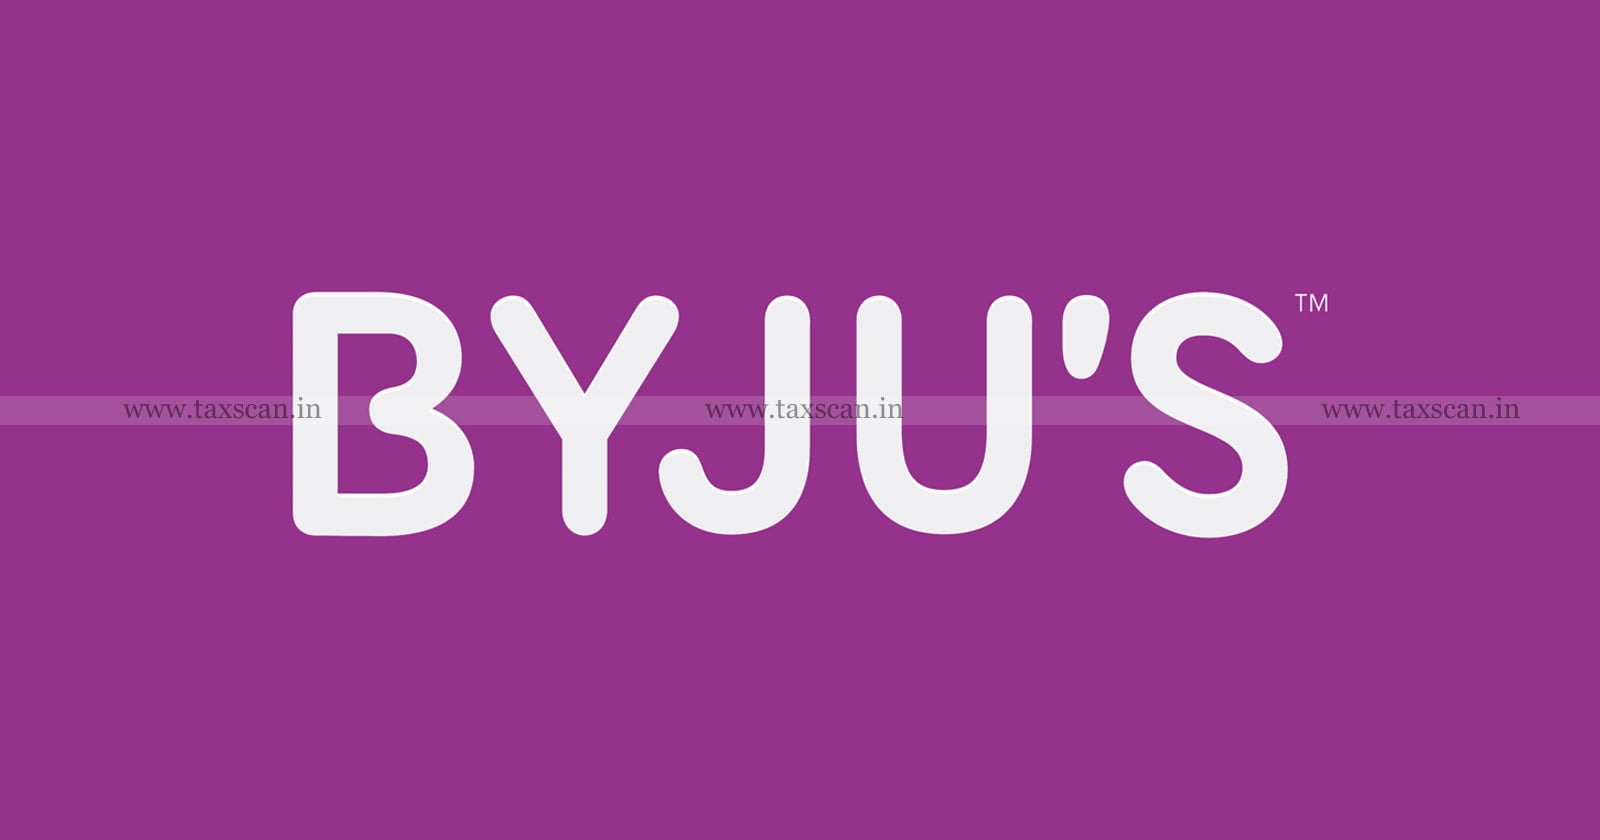 MCA orders - Inspection into - BYJUS - TAXSCAN